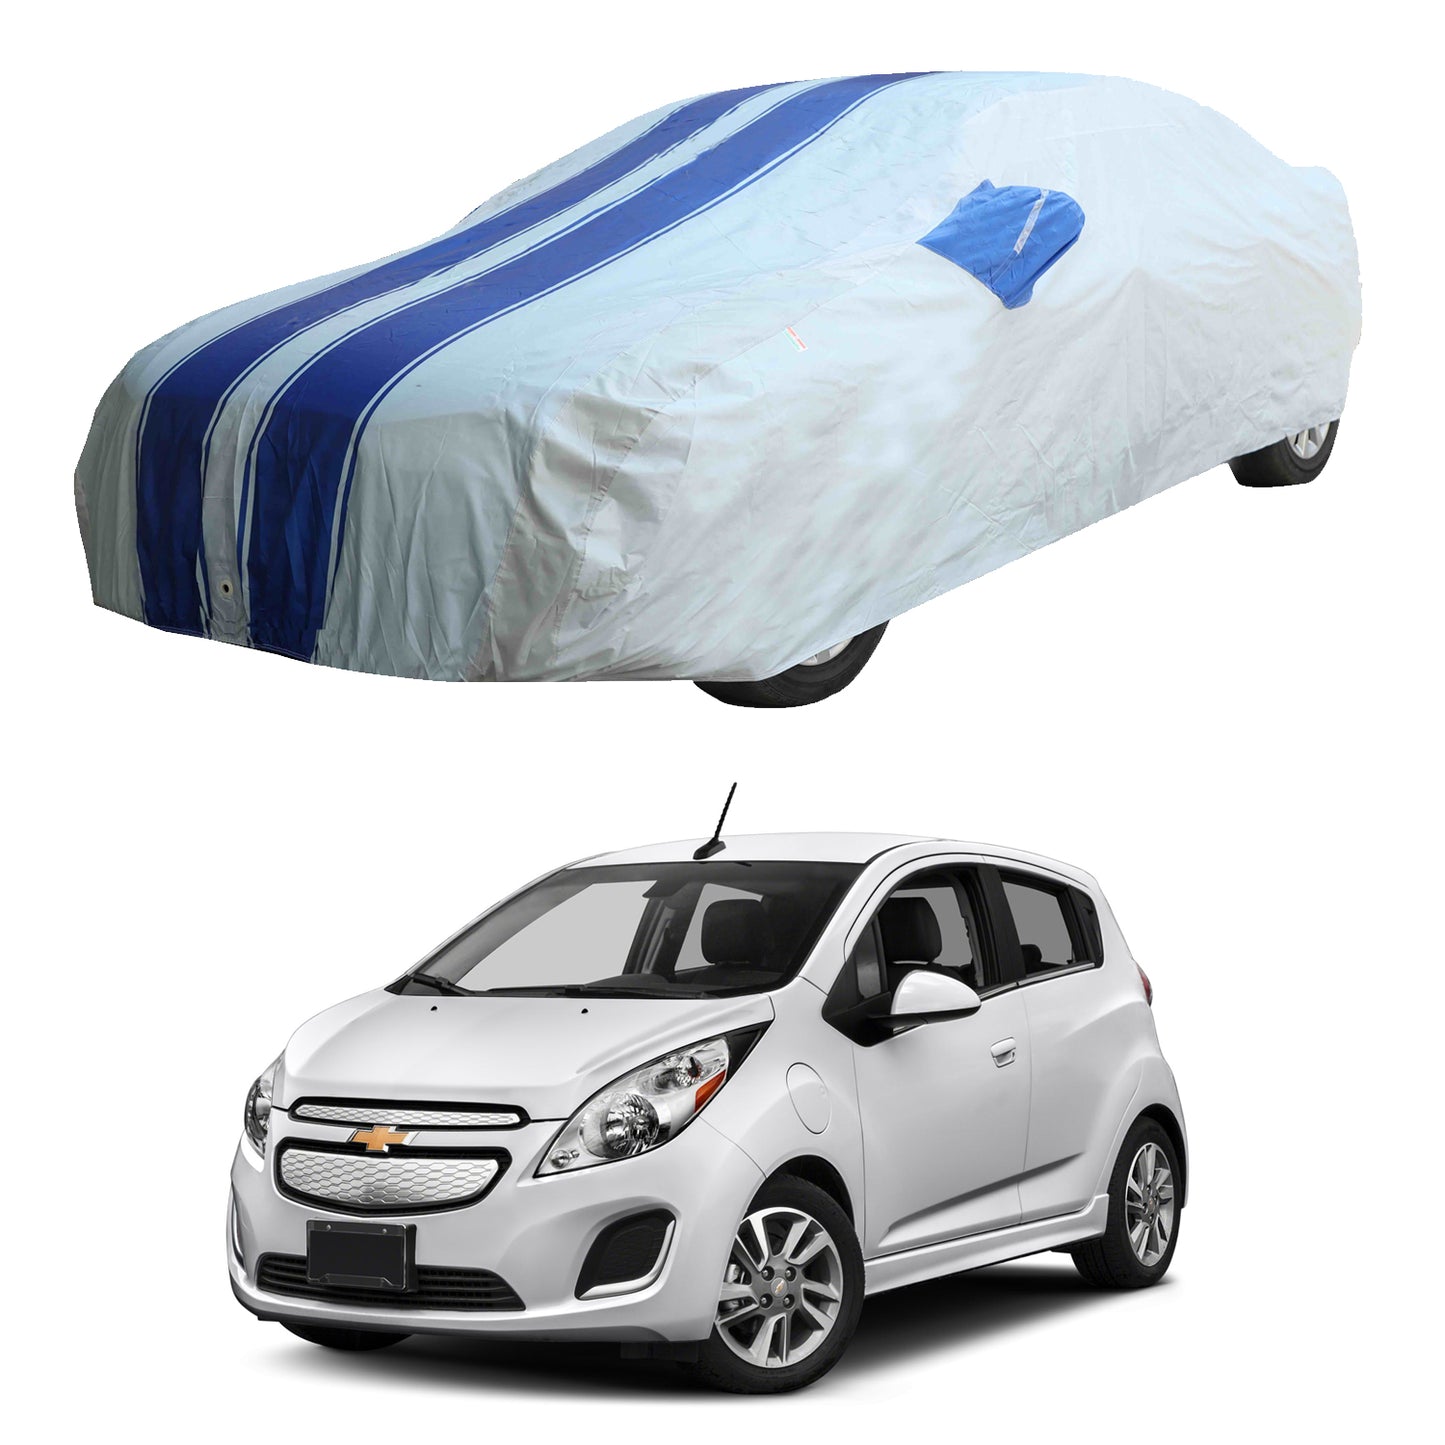 Oshotto 100% Blue dustproof and Water Resistant Car Body Cover with Mirror Pockets For Chevrolet Spark